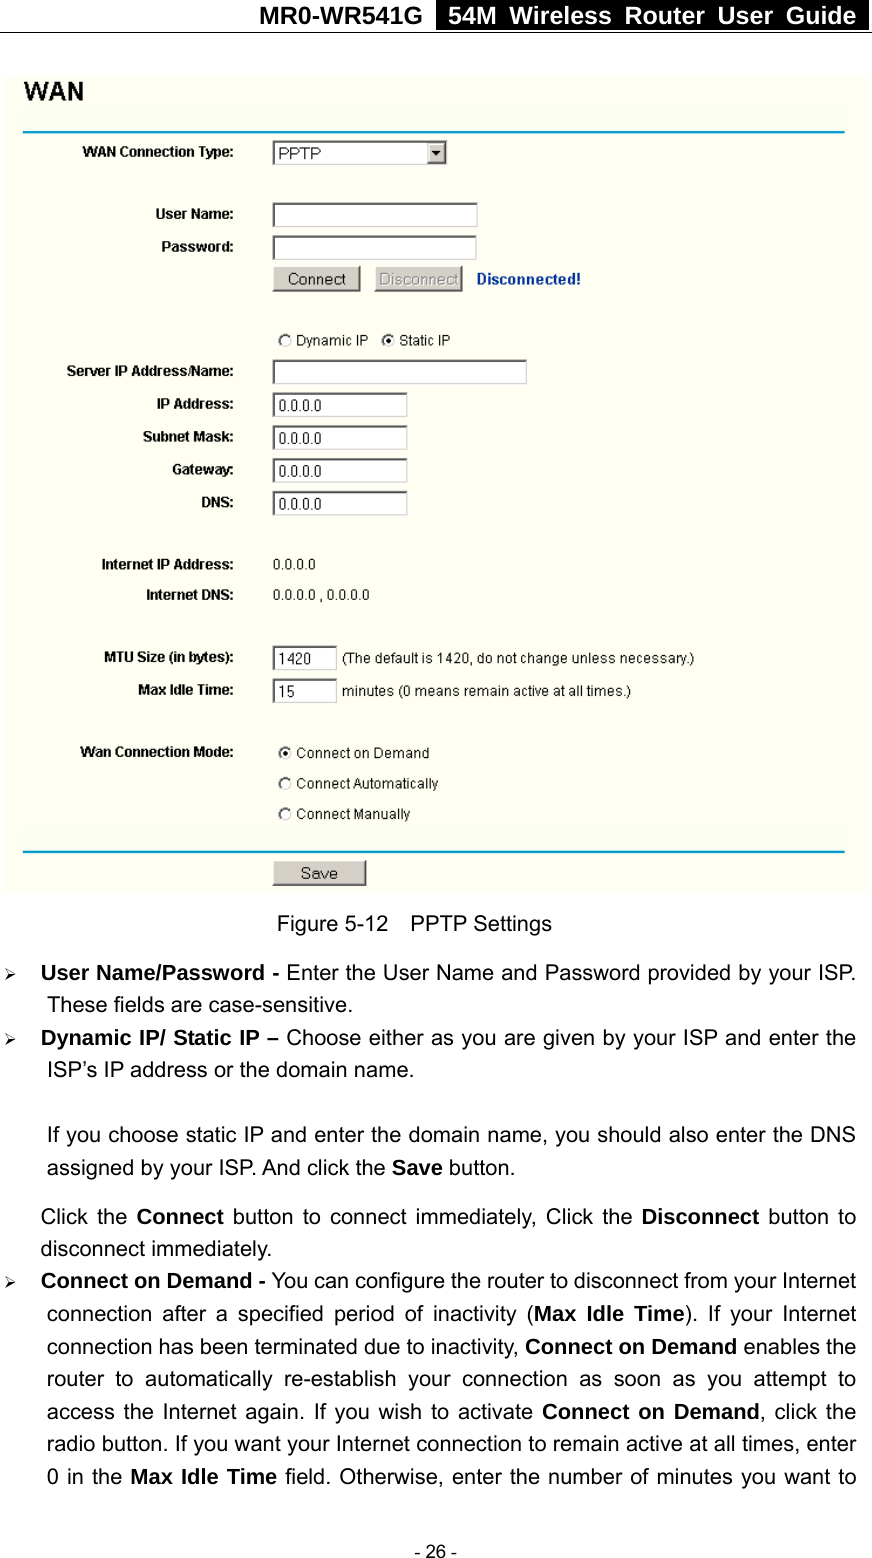 MR0-WR541G   54M Wireless Router User Guide   Figure 5-12  PPTP Settings ¾ User Name/Password - Enter the User Name and Password provided by your ISP. These fields are case-sensitive. ¾ Dynamic IP/ Static IP – Choose either as you are given by your ISP and enter the ISP’s IP address or the domain name.  If you choose static IP and enter the domain name, you should also enter the DNS assigned by your ISP. And click the Save button. Click the Connect button to connect immediately, Click the Disconnect button to disconnect immediately. ¾ Connect on Demand - You can configure the router to disconnect from your Internet connection after a specified period of inactivity (Max Idle Time). If your Internet connection has been terminated due to inactivity, Connect on Demand enables the router to automatically re-establish your connection as soon as you attempt to access the Internet again. If you wish to activate Connect on Demand, click the radio button. If you want your Internet connection to remain active at all times, enter 0 in the Max Idle Time field. Otherwise, enter the number of minutes you want to  - 26 - 